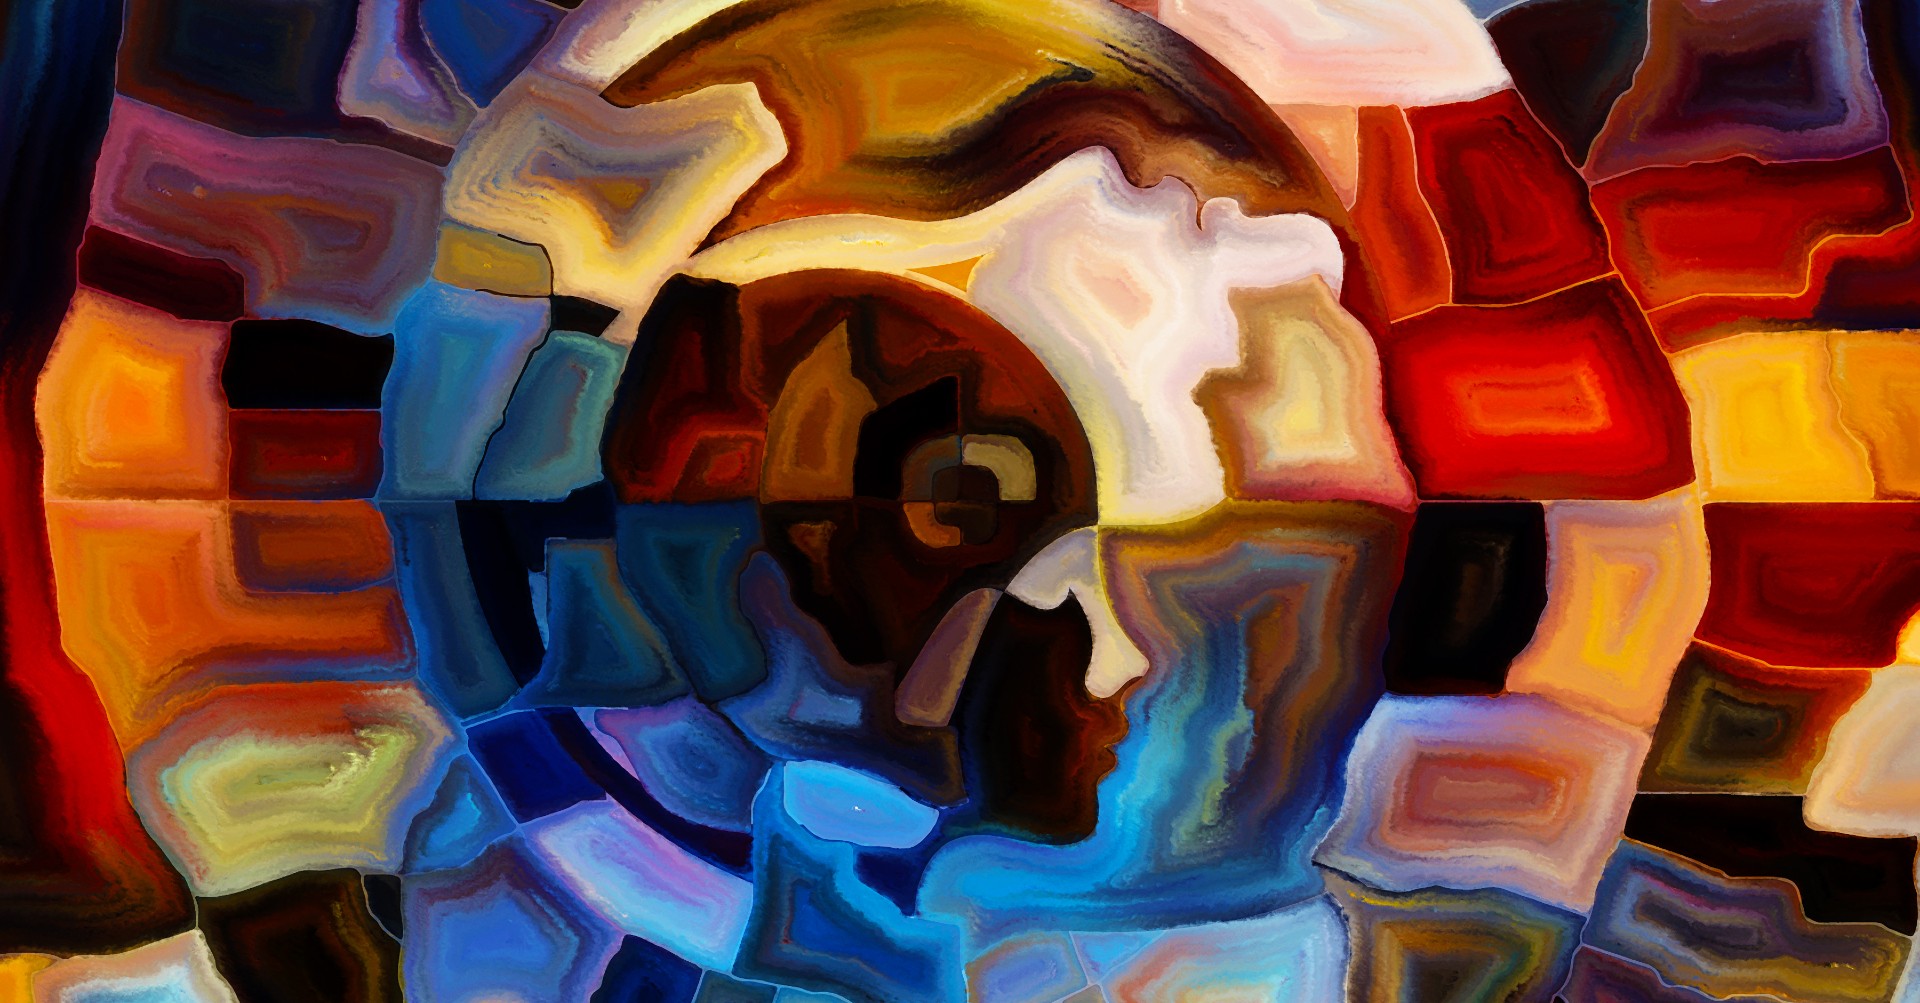 Colorful abstract image of a person in profile